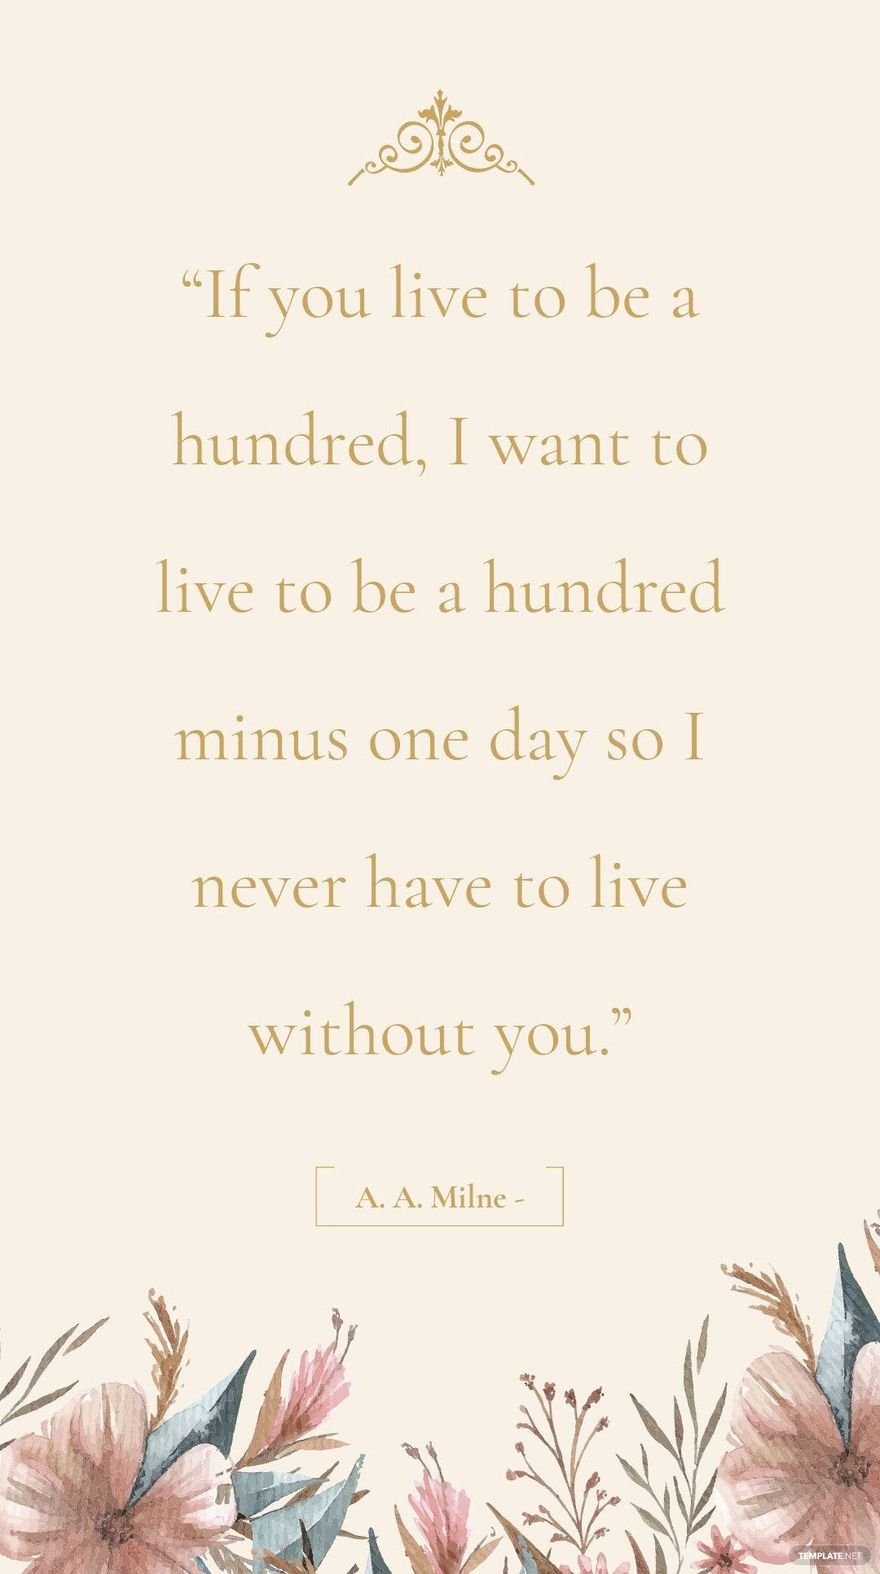 A. A. Milne - “If you live to be a hundred, I want to live to be a hundred minus one day so I never have to live without you.”